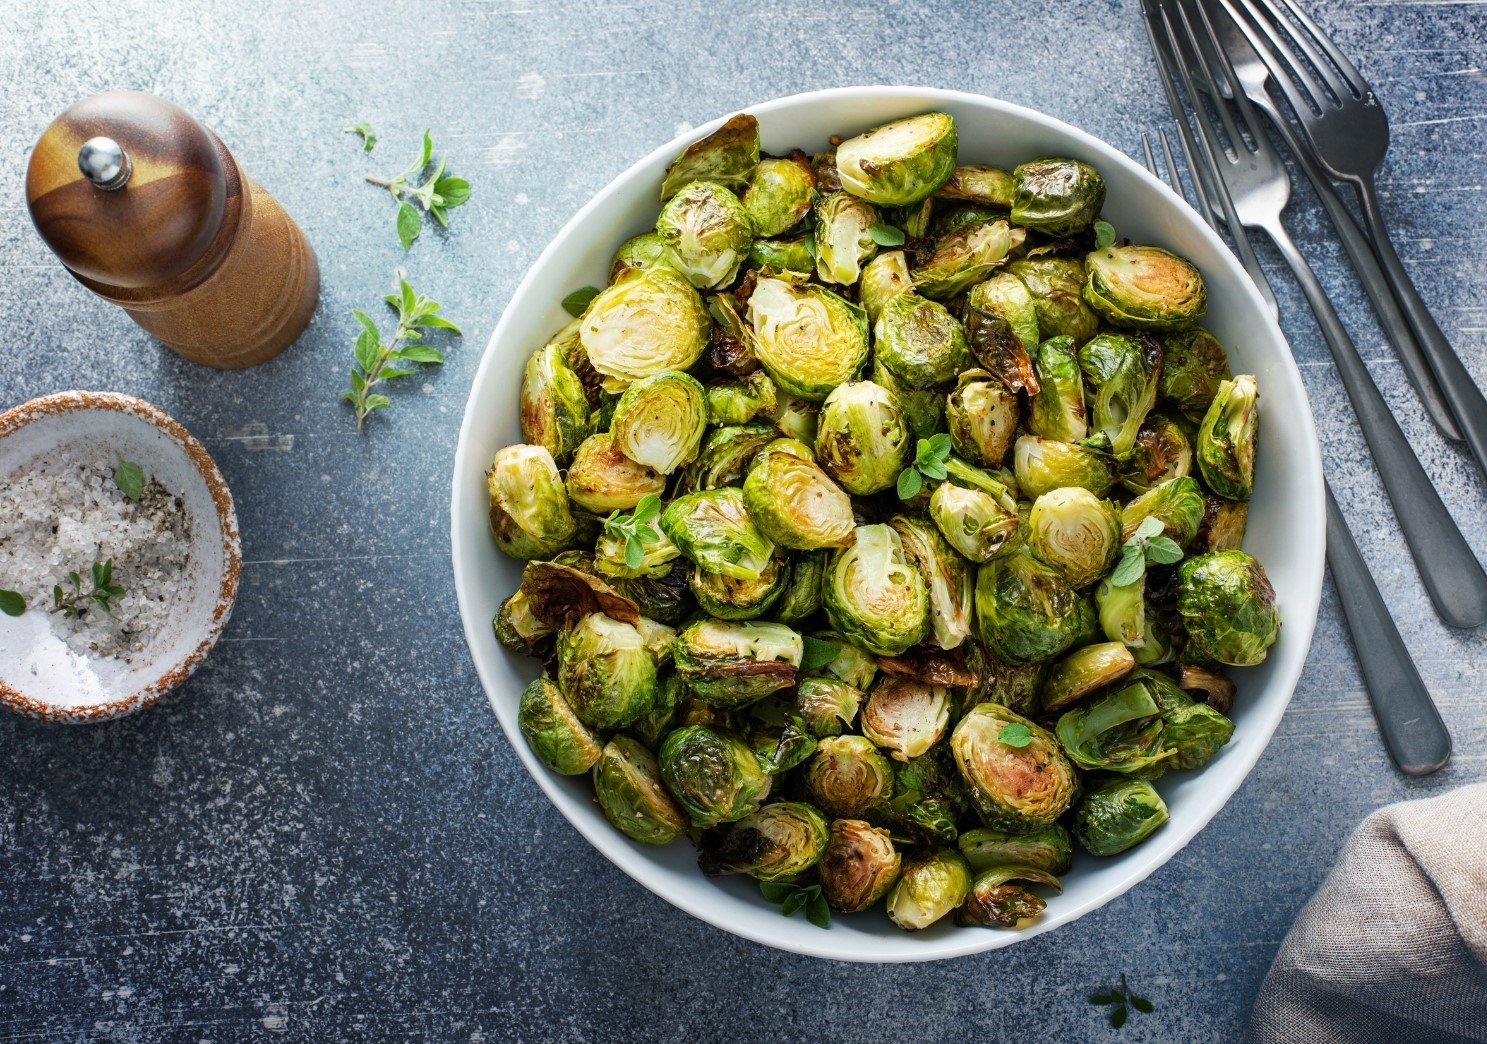 Roasted Brussels sprouts in a bowl on a table with forks, bowl of salt and pepper mill